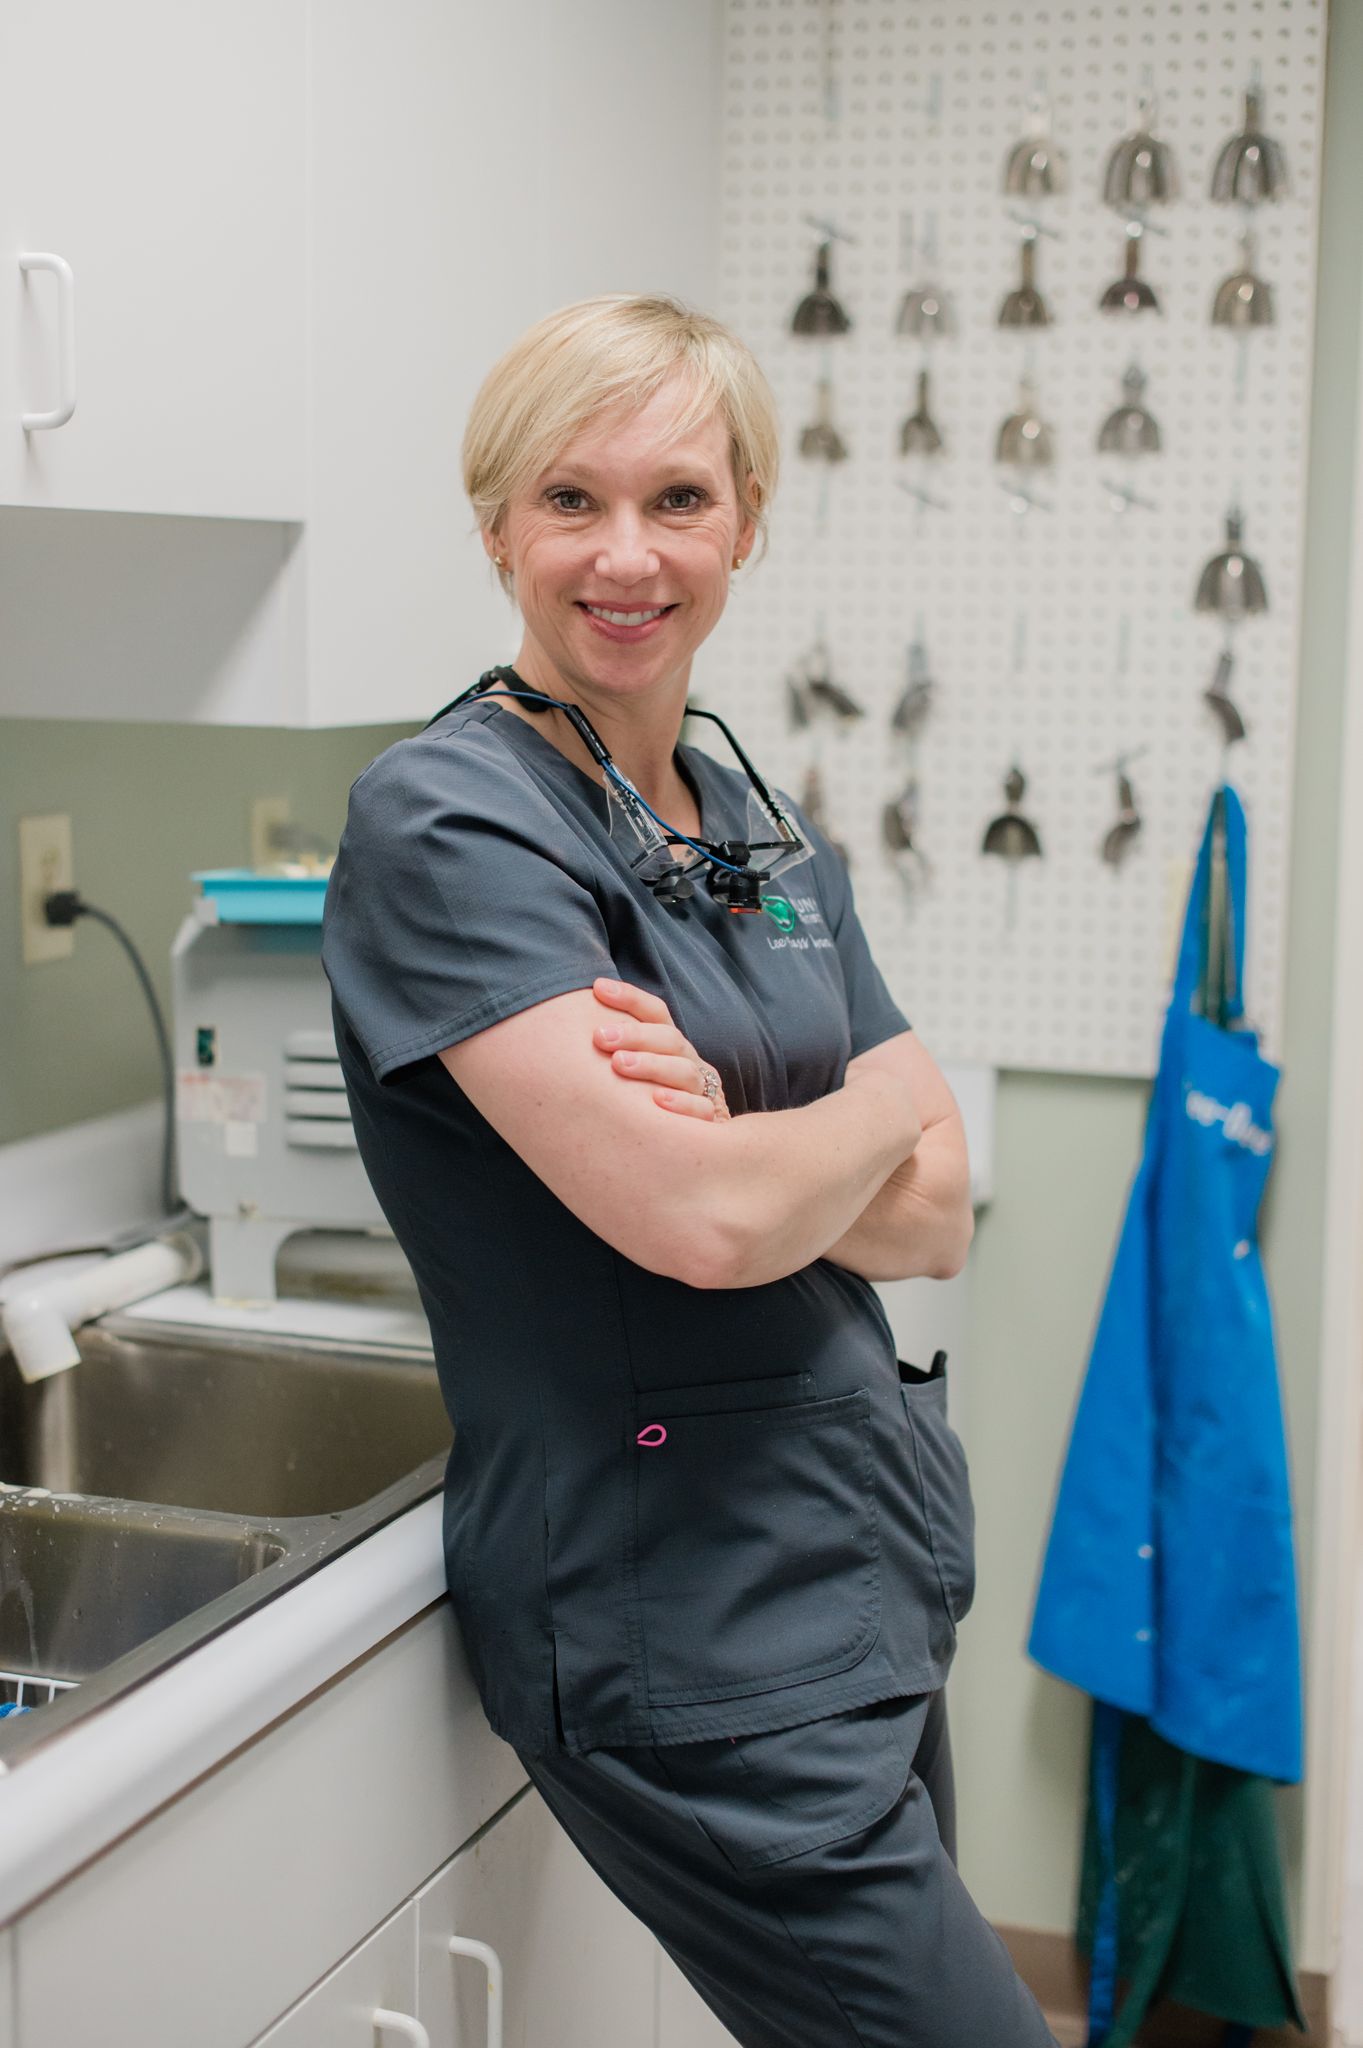 Dr. Lee Bass Nunn wears scrubs and leans against a counter in her dentist's office.